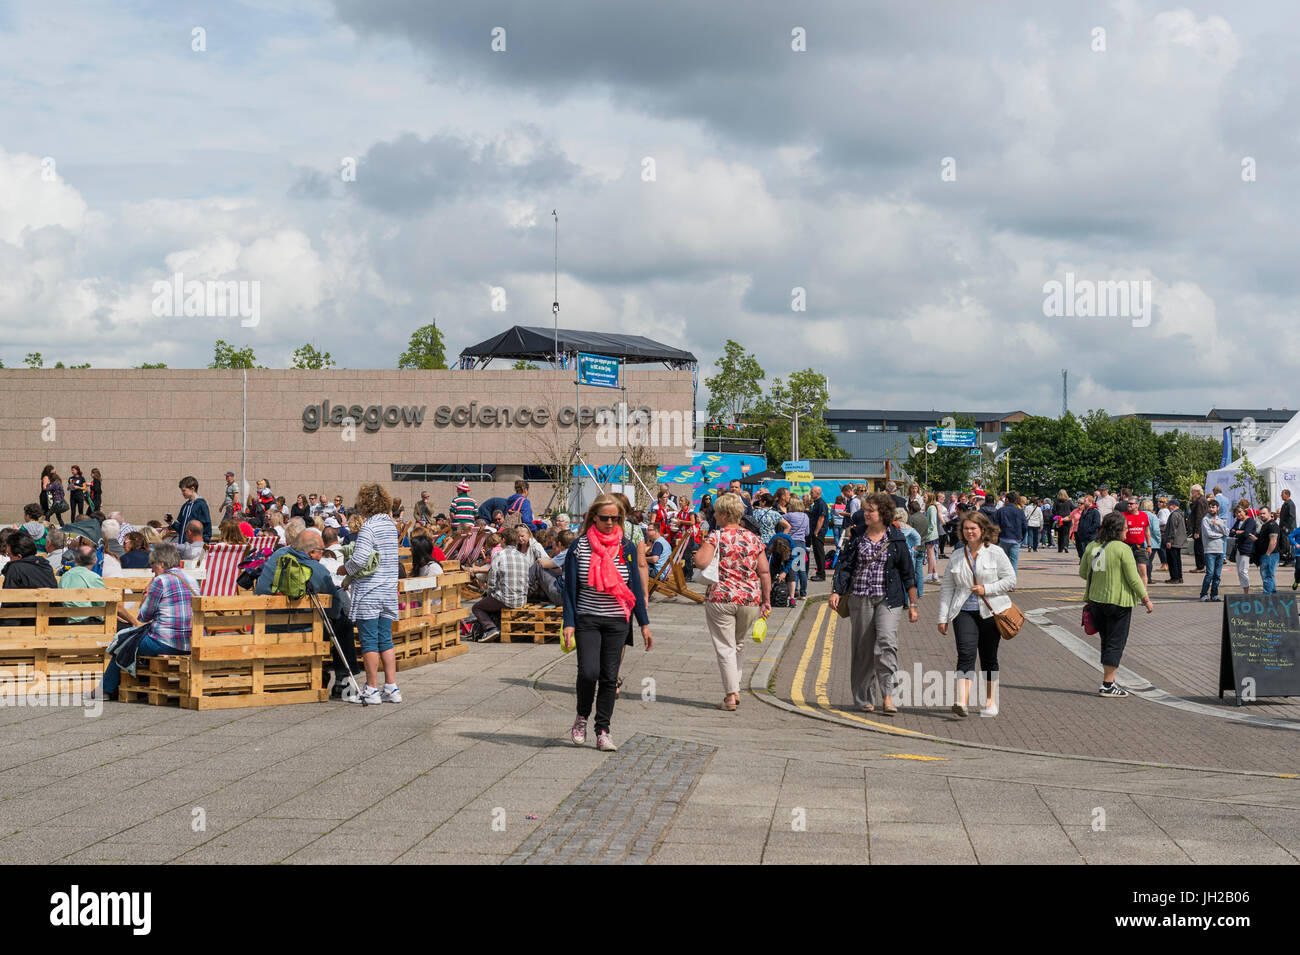 Glasgow, Scotland, UK - August 1, 2014: Members of the public at the Glasgow Science Centre at Pacific Quay in Glasgow. Stock Photo